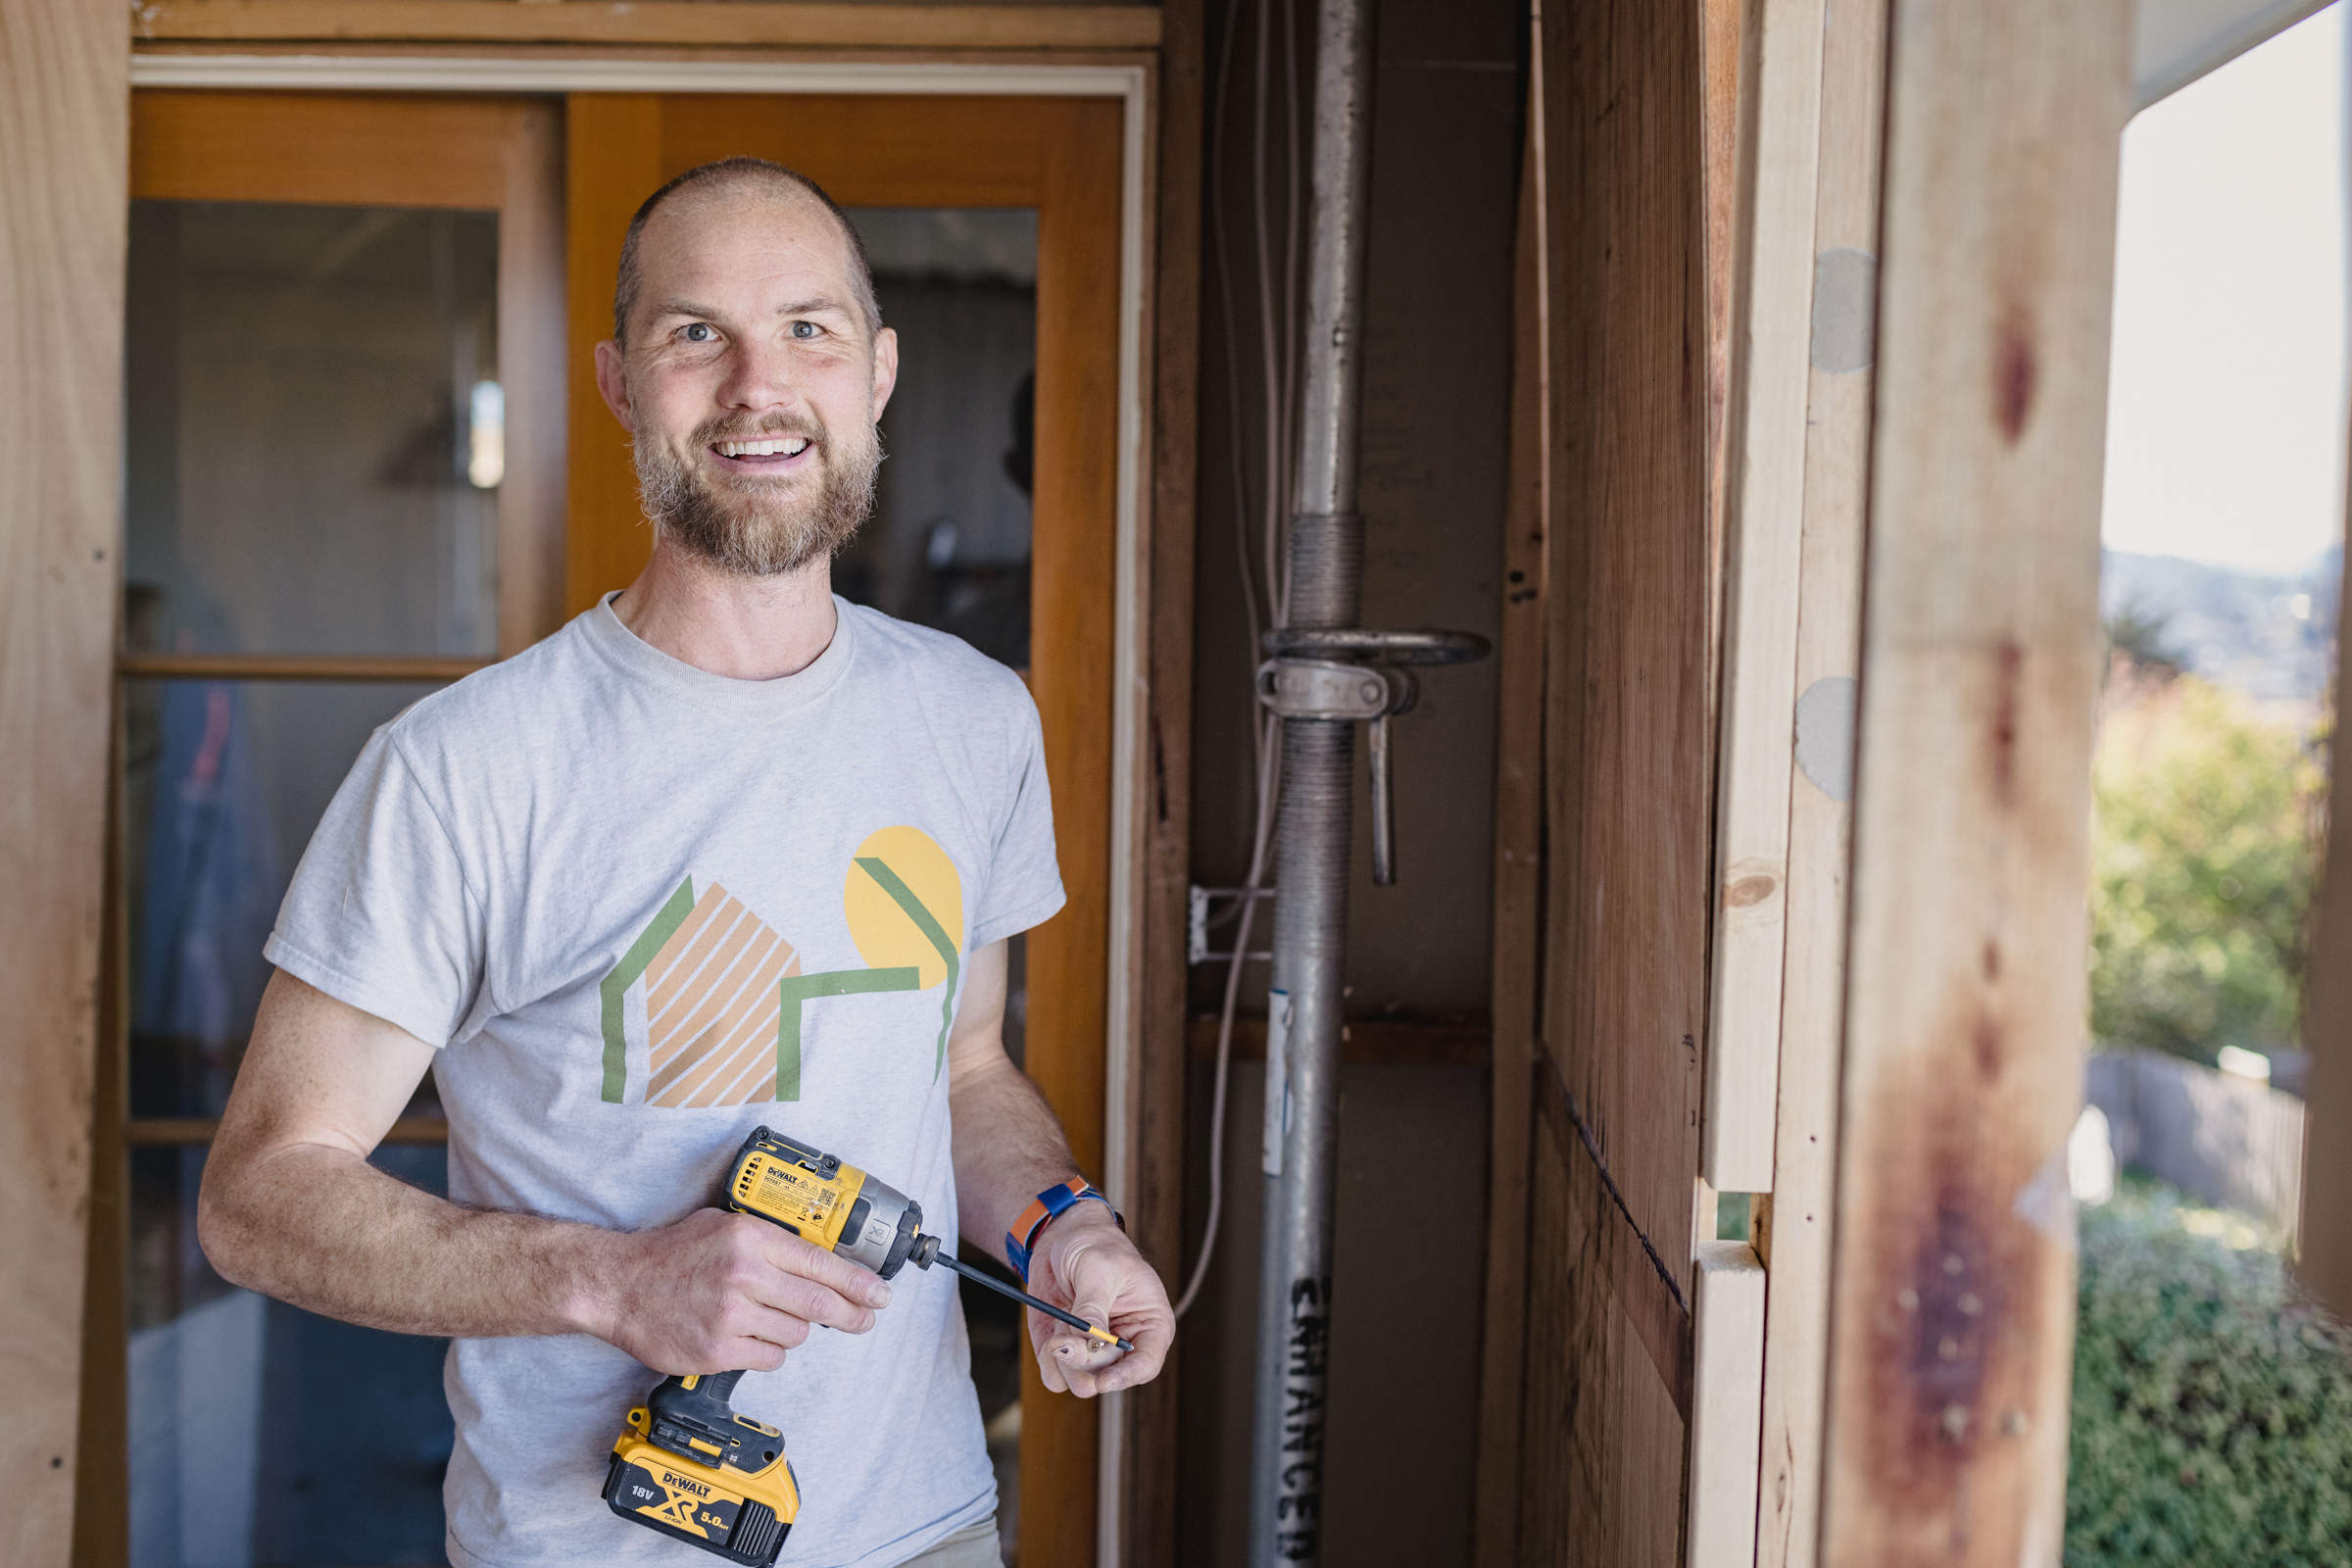 An adult apprentice, holding a drill and working on a home renovation, demonstrating teamwork and a positive team culture. Photo: Jordan Davis.